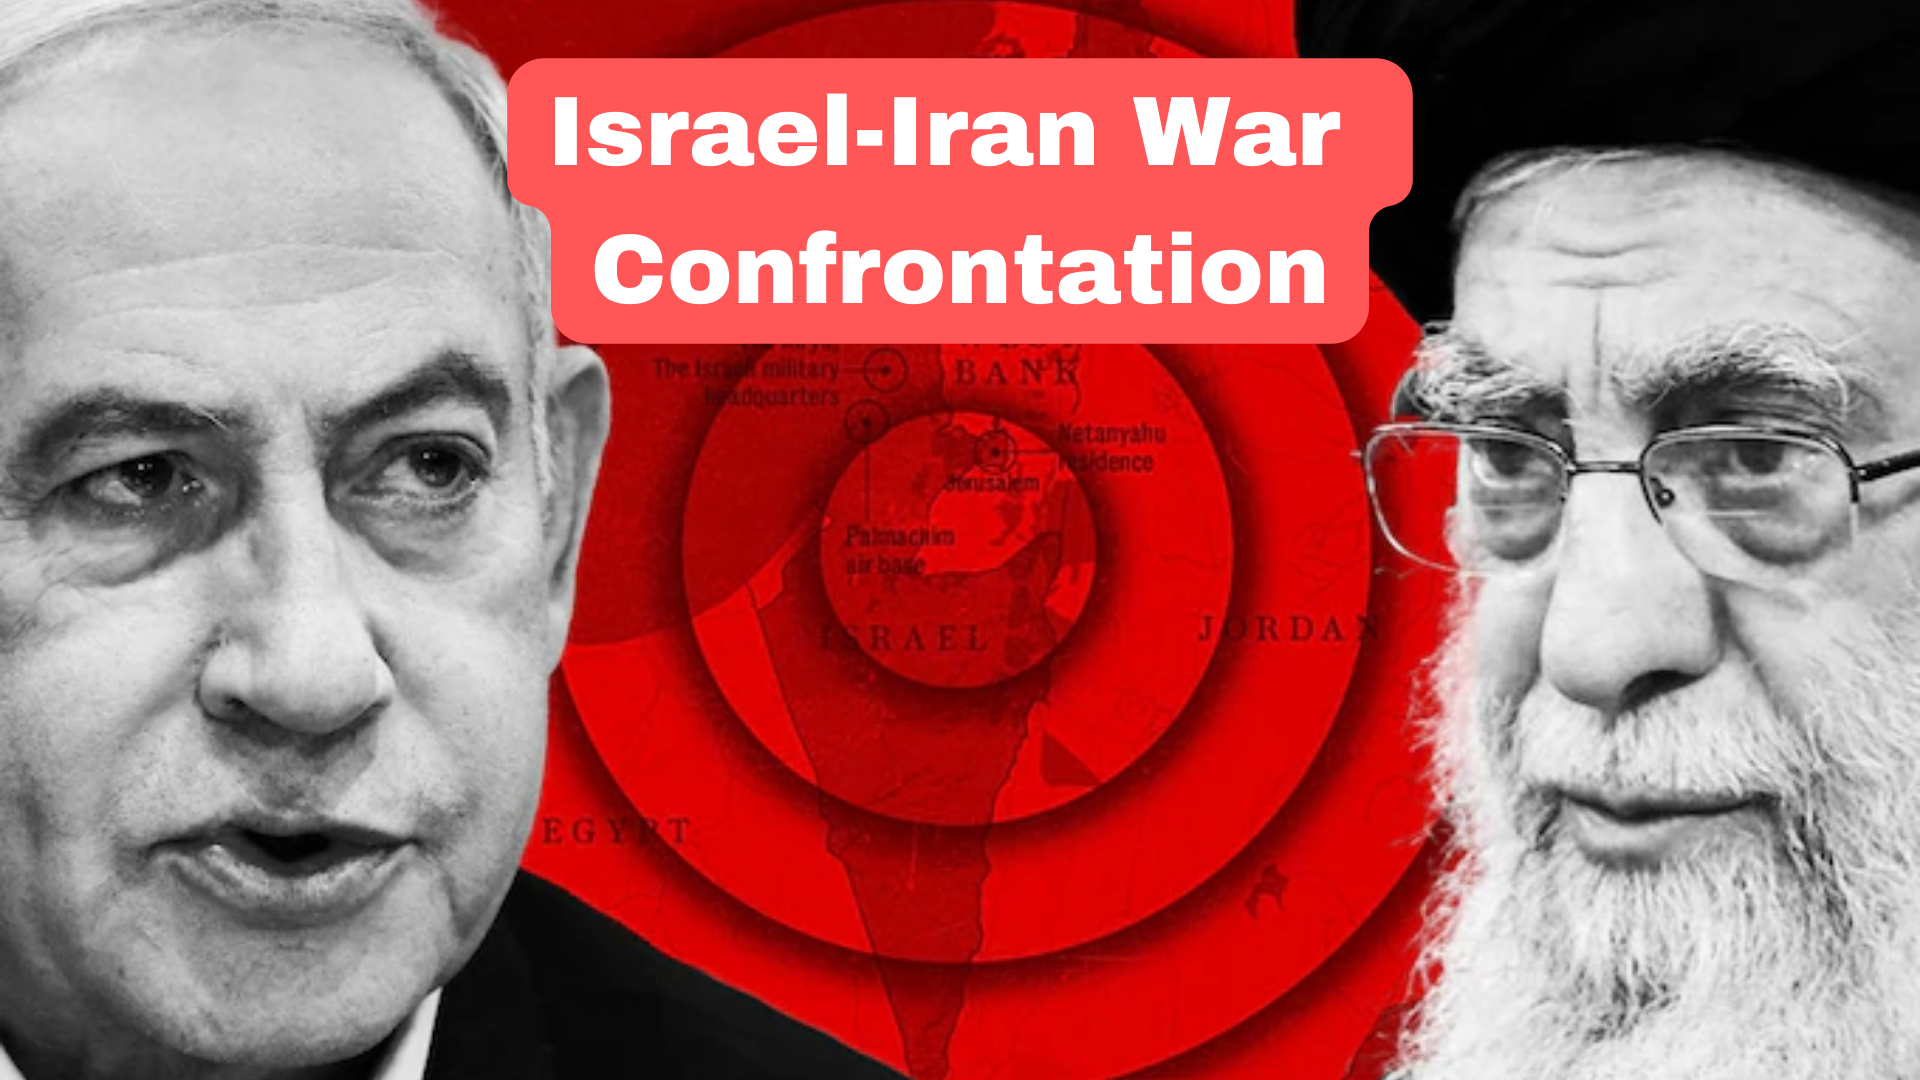 How Israel-Iran War Confrontation, The New Geopolitical Implication